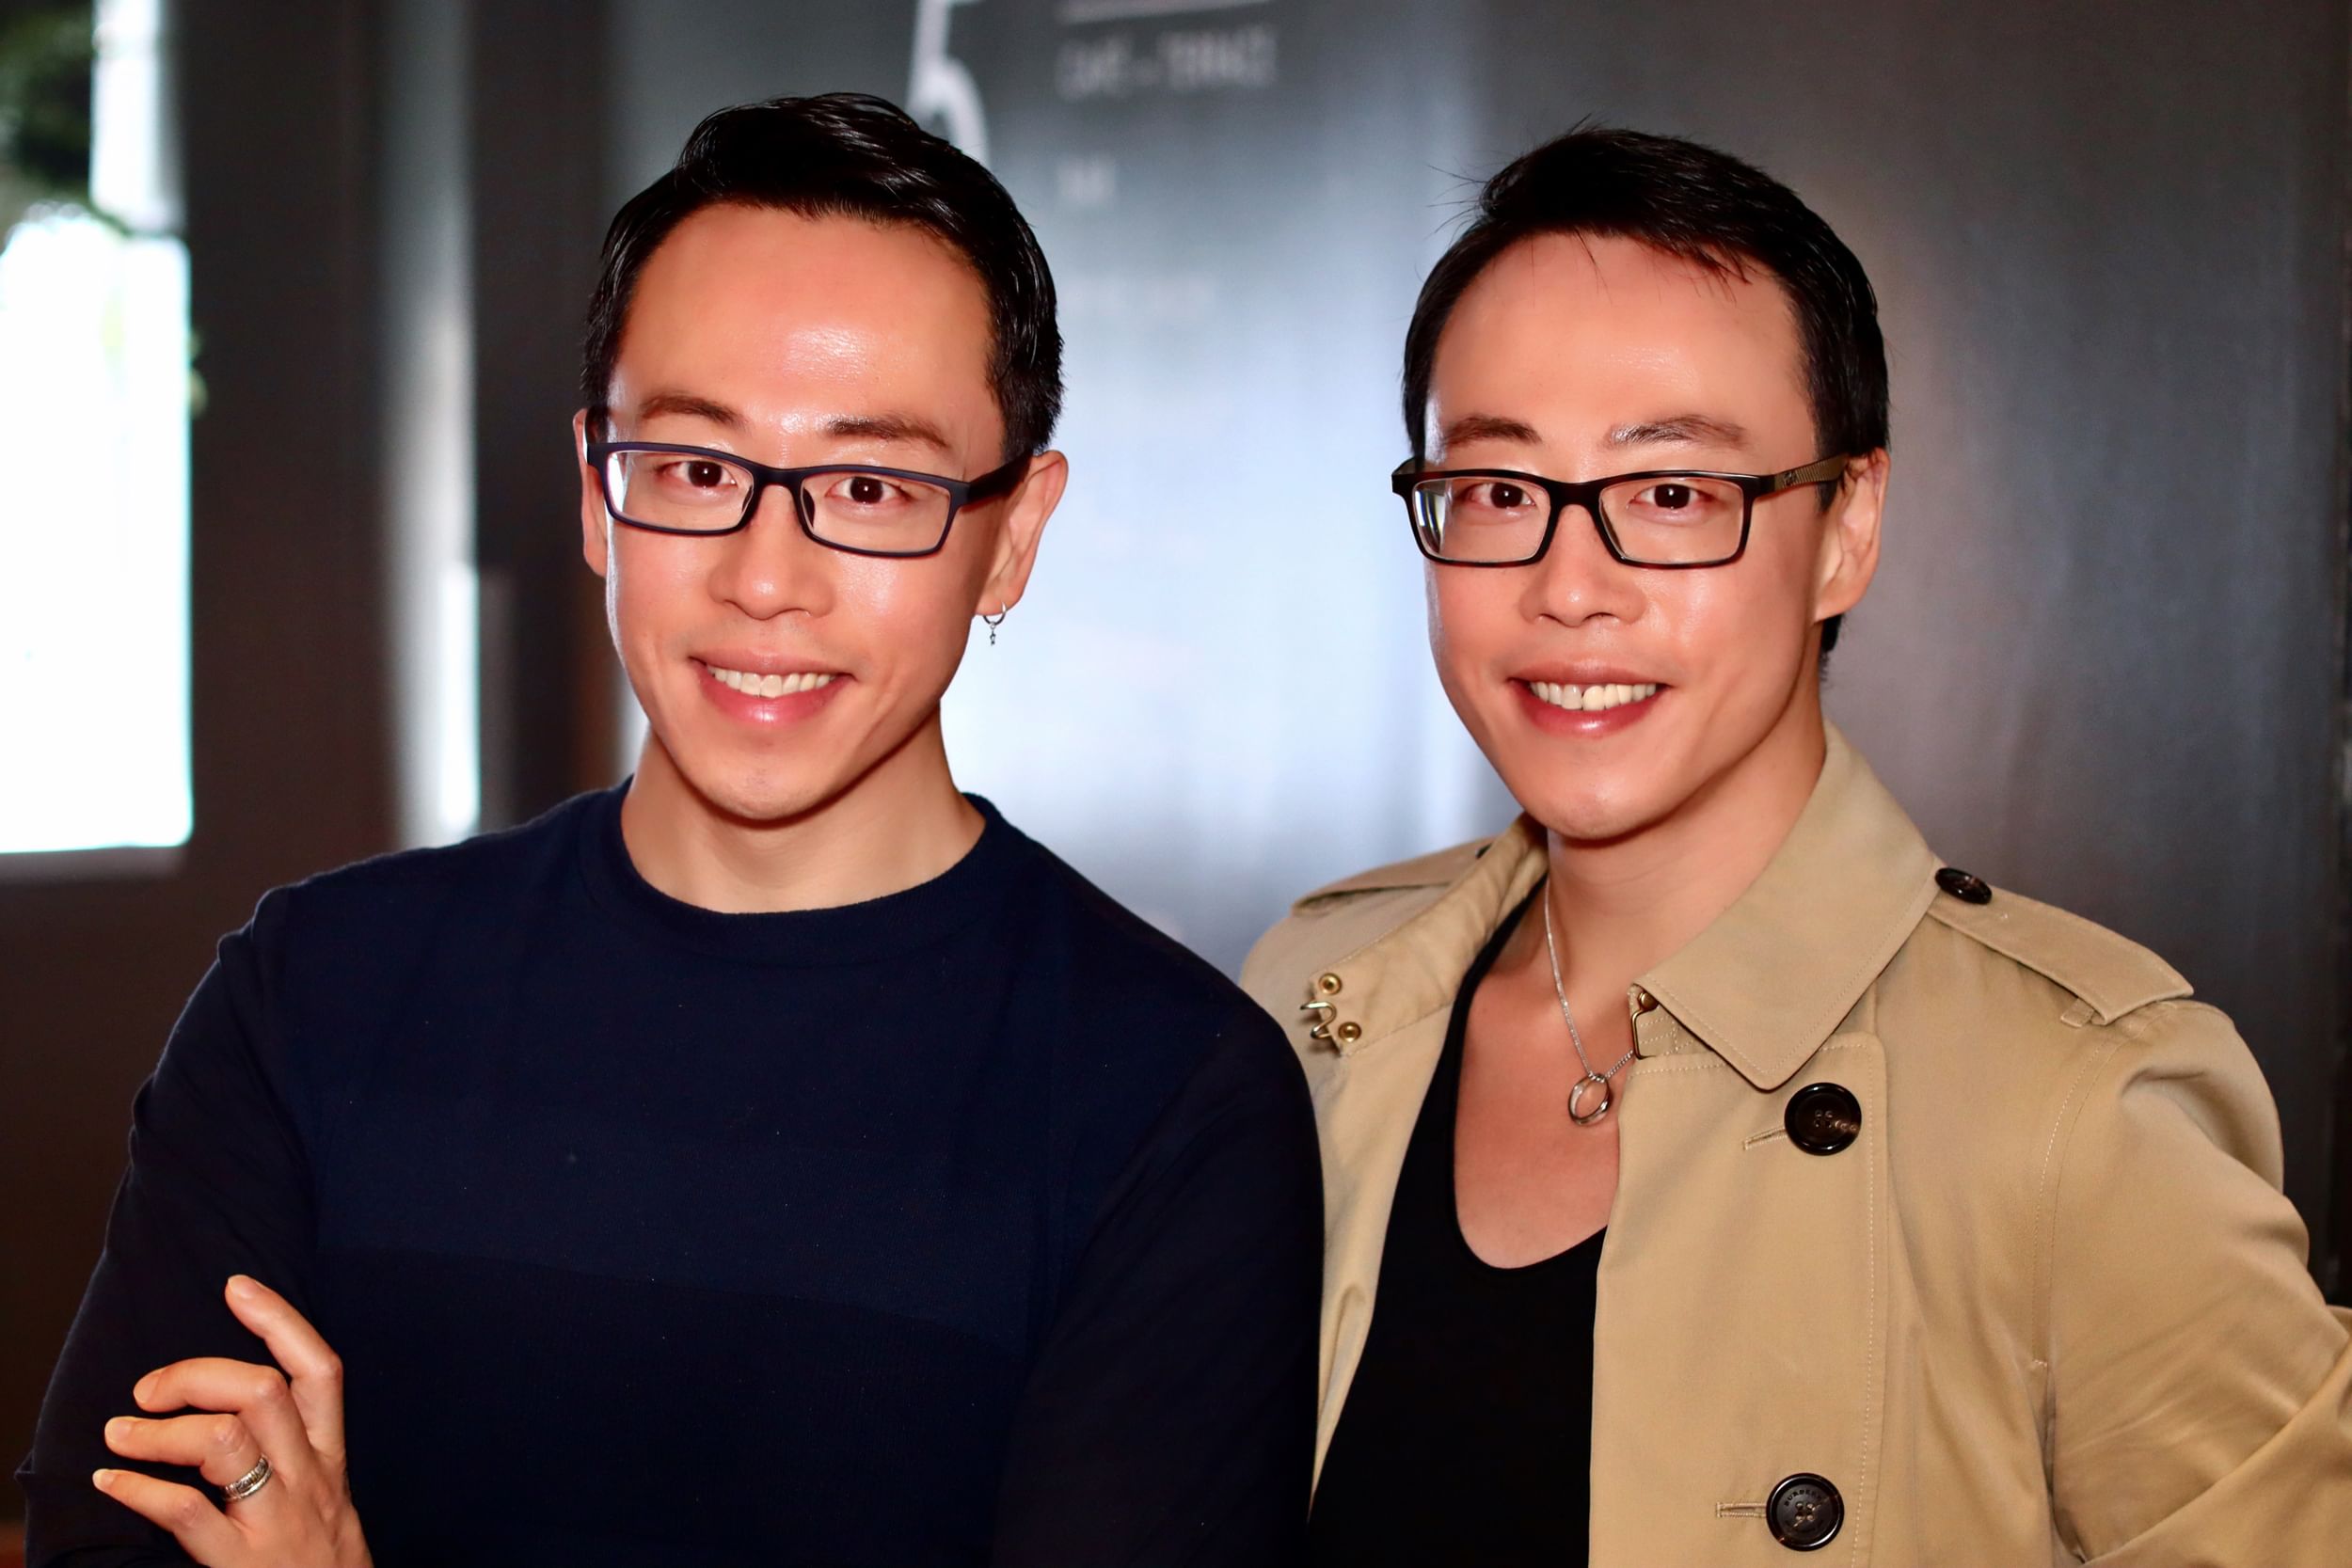 Shakeup Cosmetic’s two founders 